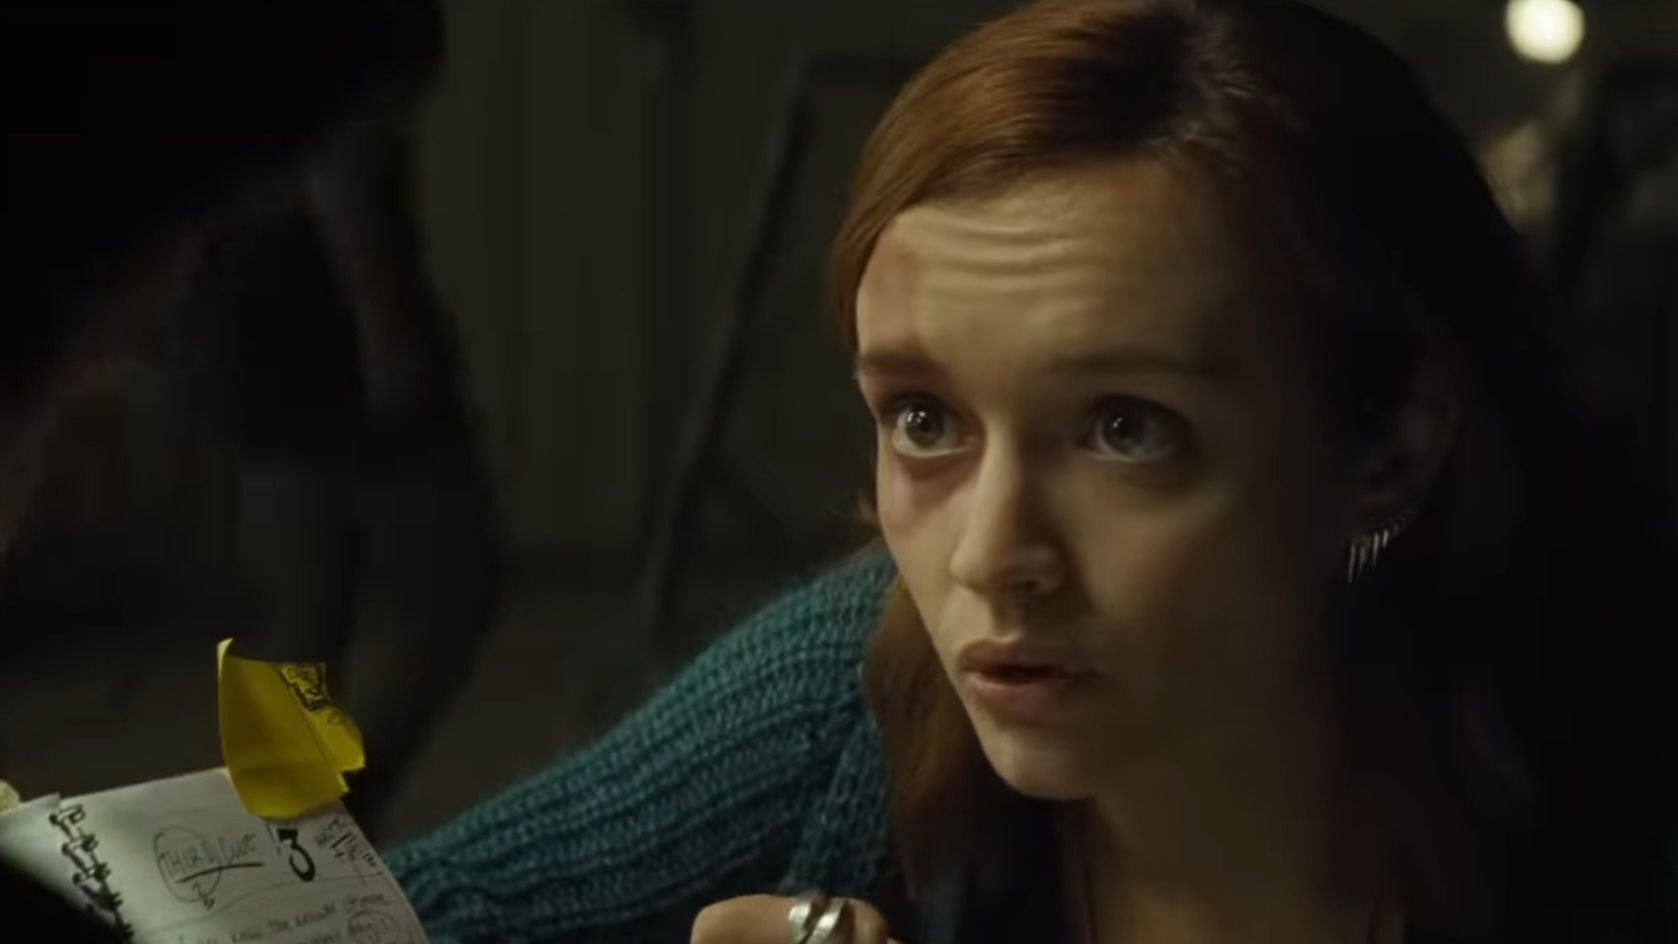 Olivia Cooke as Samantha Cook (Image via Warner Bros Pictures, Ready Player One - Dreamer Trailer, 01:13)